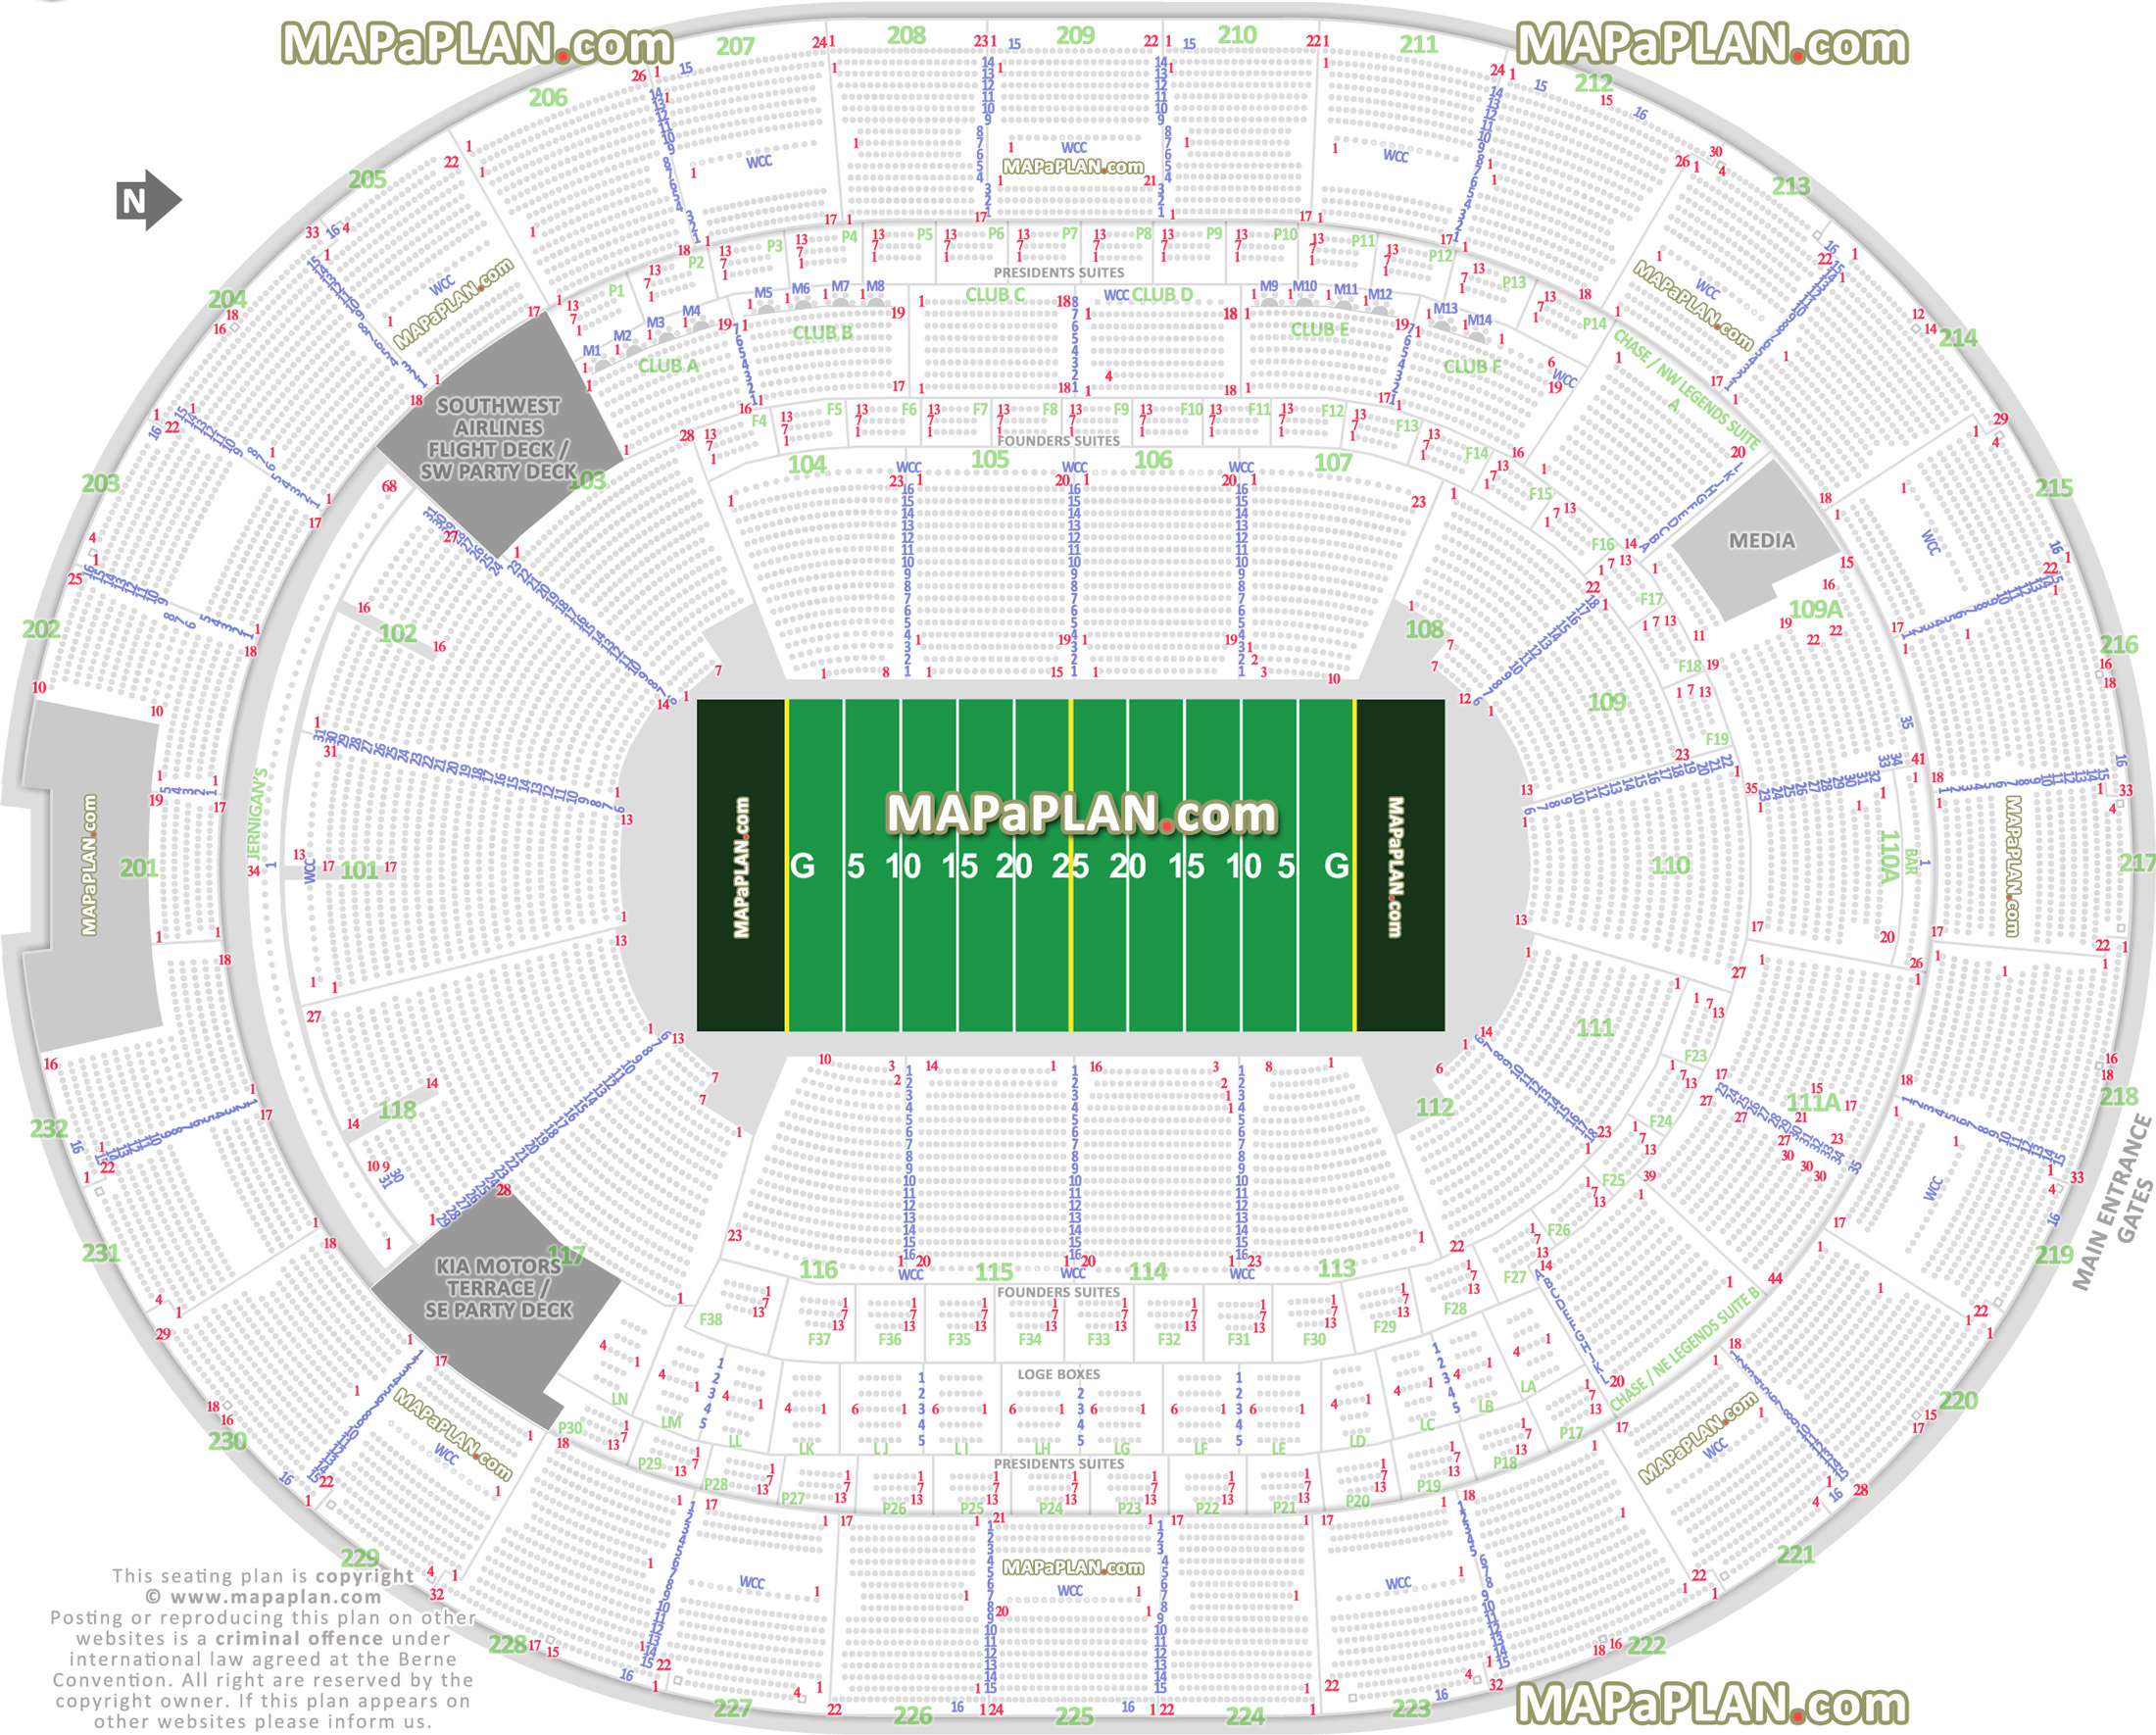 predators arena football sideline baseline full southwest airlines flight deck kia motors terrace mvp tables chase silver suites Orlando Amway Center seating chart